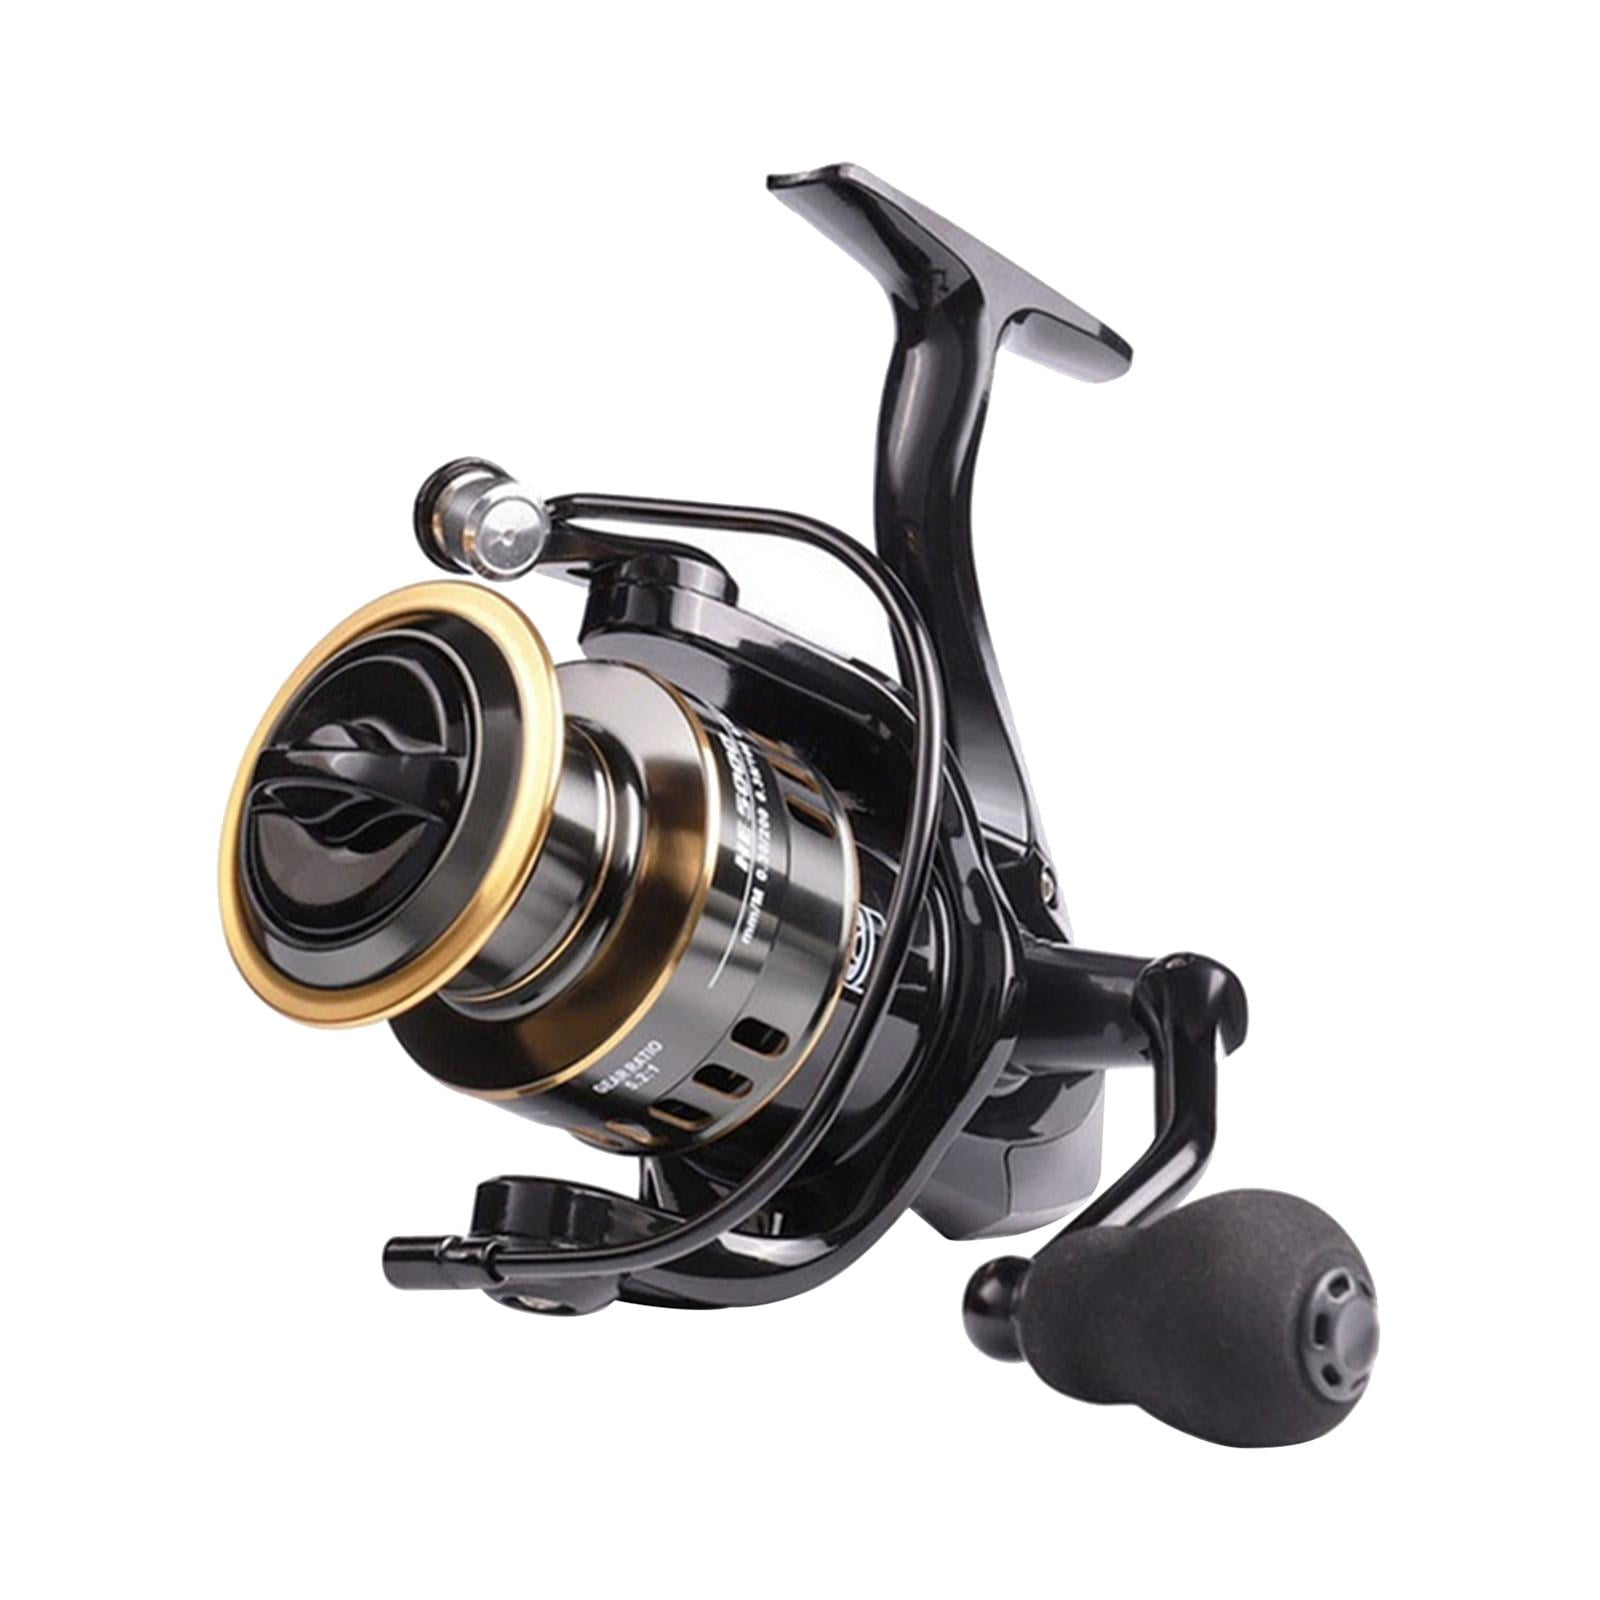  8 Bearing Fishing Spinning Reel Red Color 5.2:1 Gear